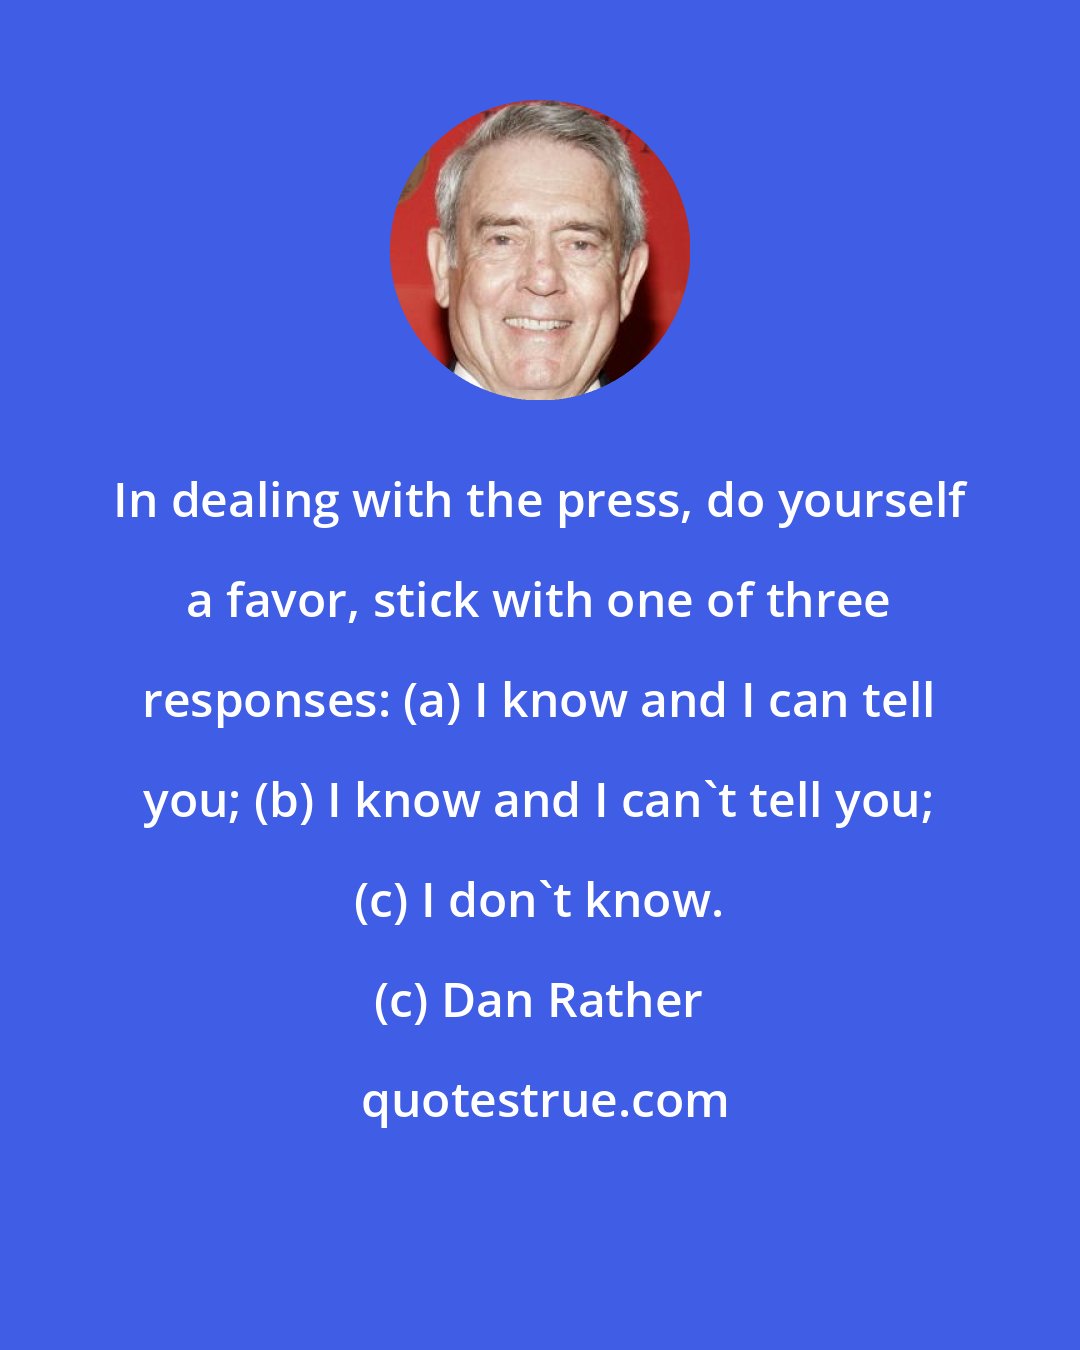 Dan Rather: In dealing with the press, do yourself a favor, stick with one of three responses: (a) I know and I can tell you; (b) I know and I can't tell you; (c) I don't know.